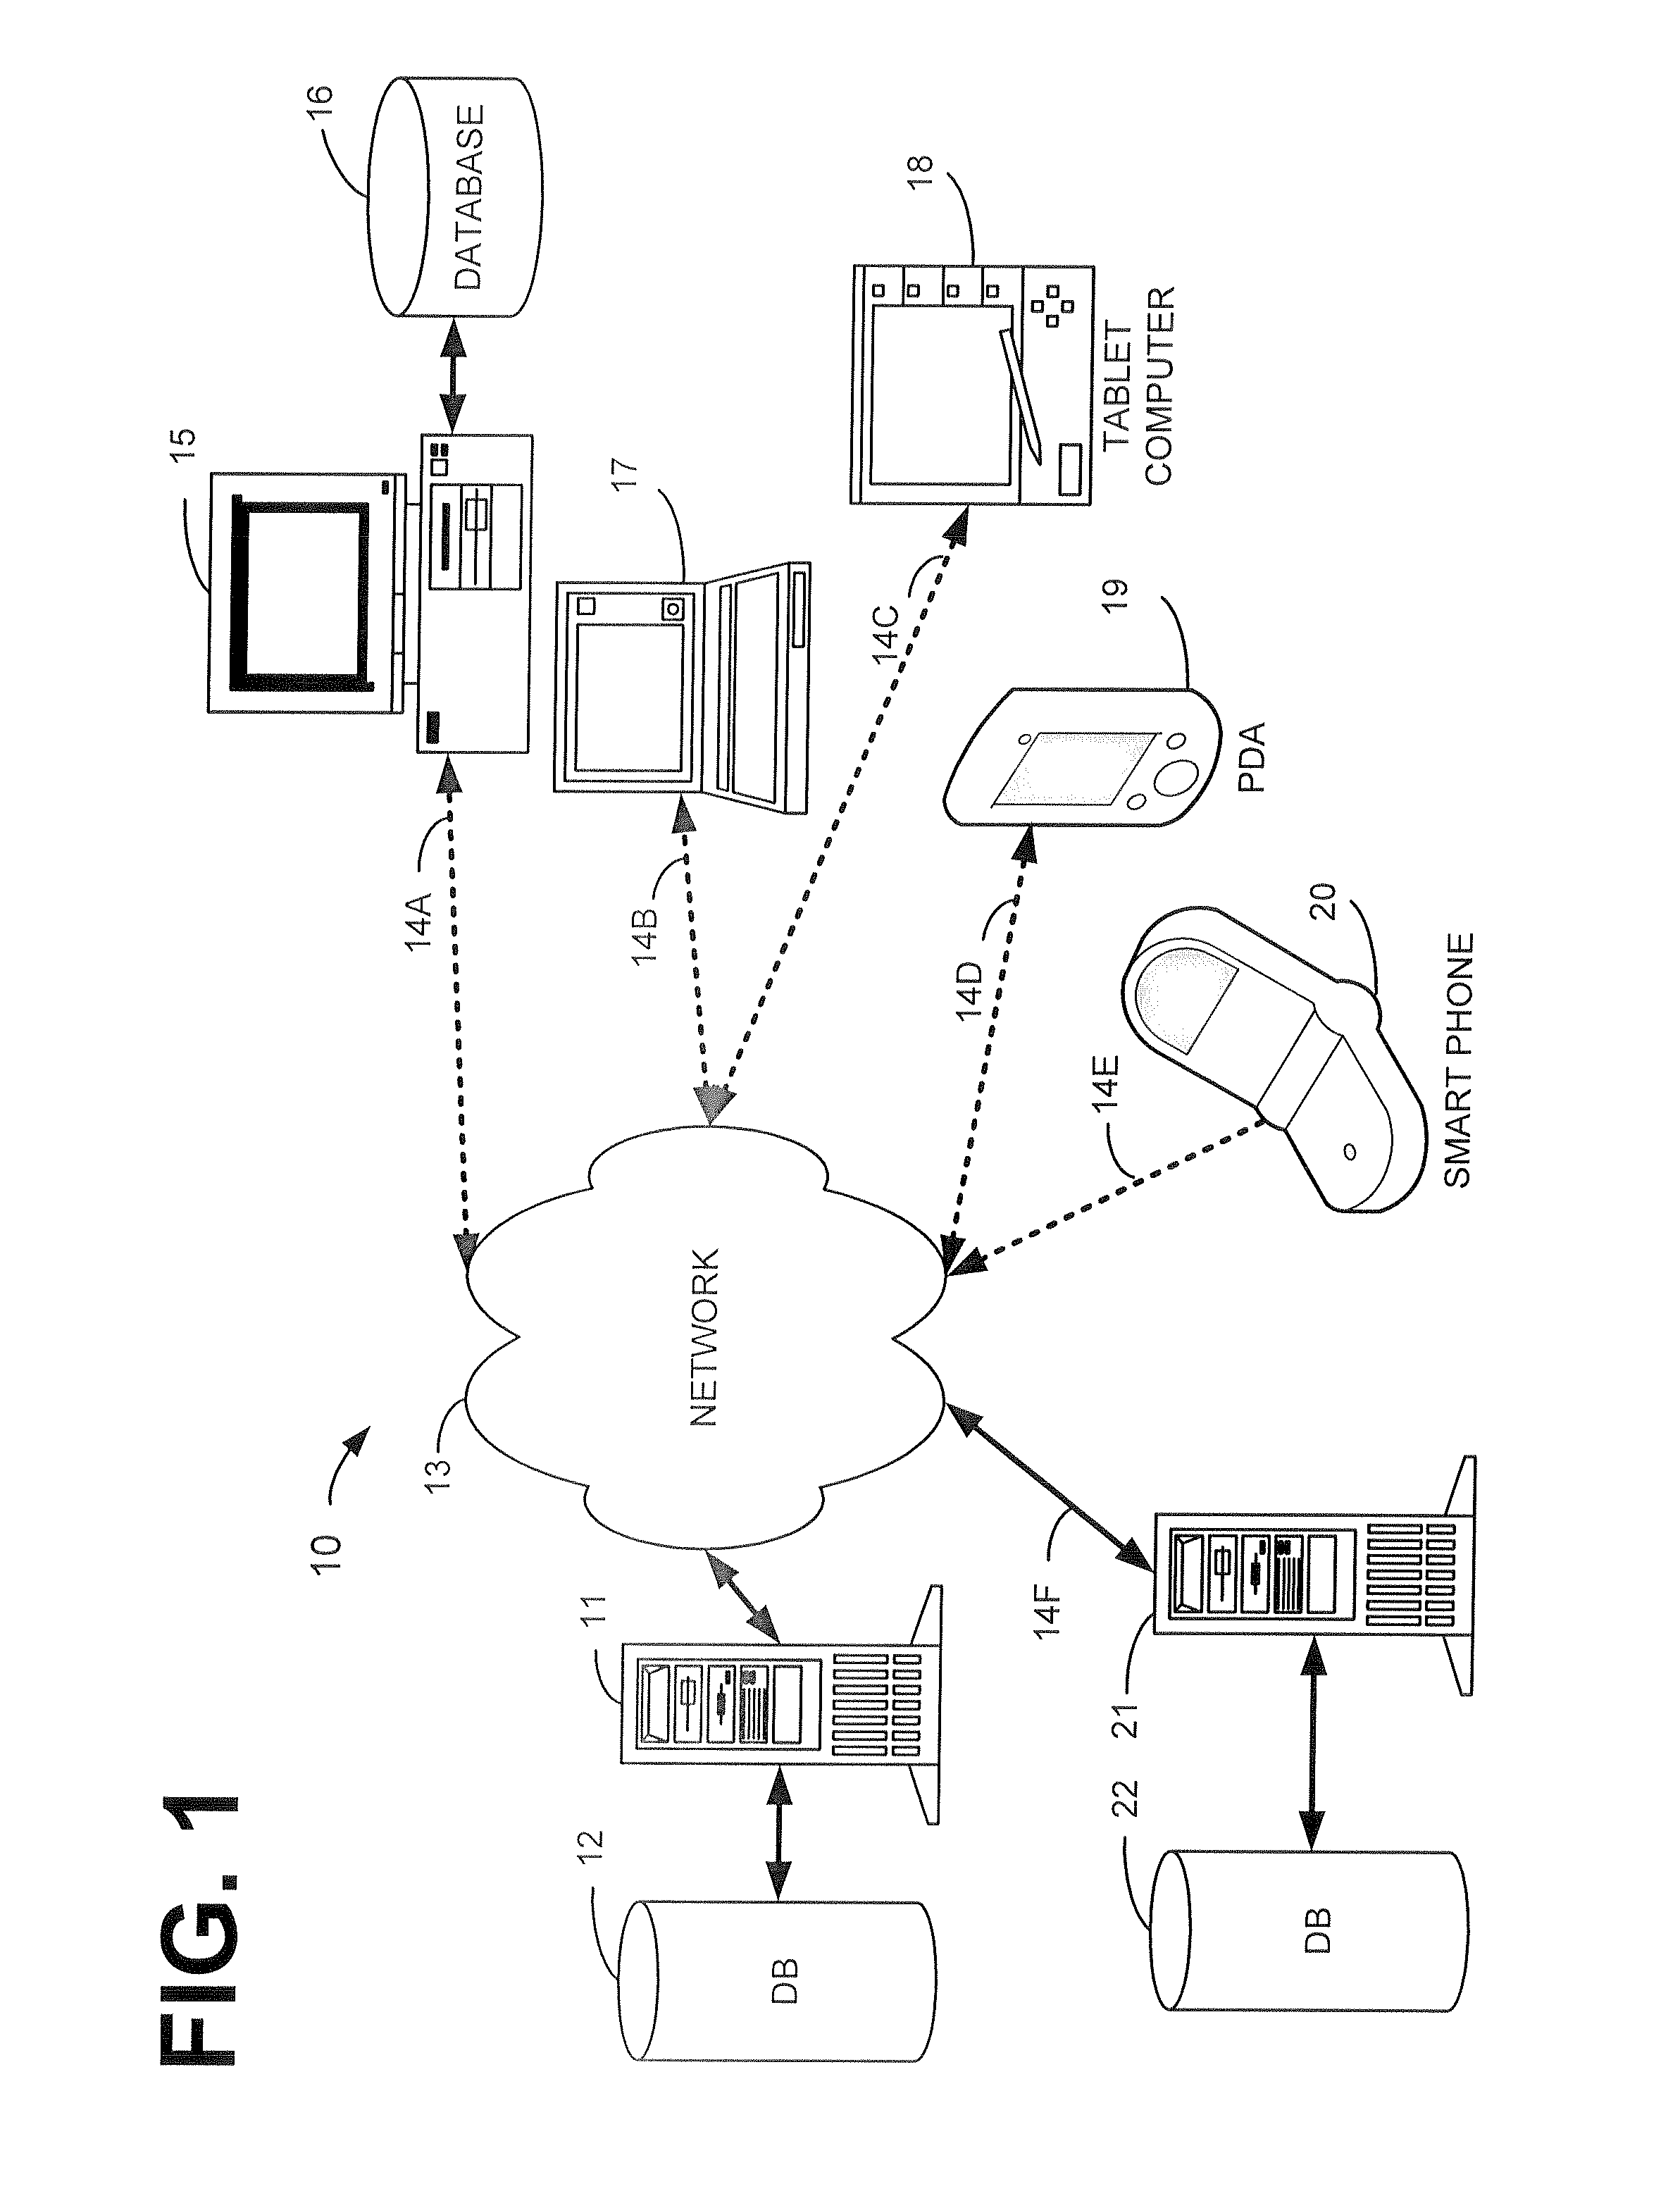 System and method for rewards program for credit card issuer